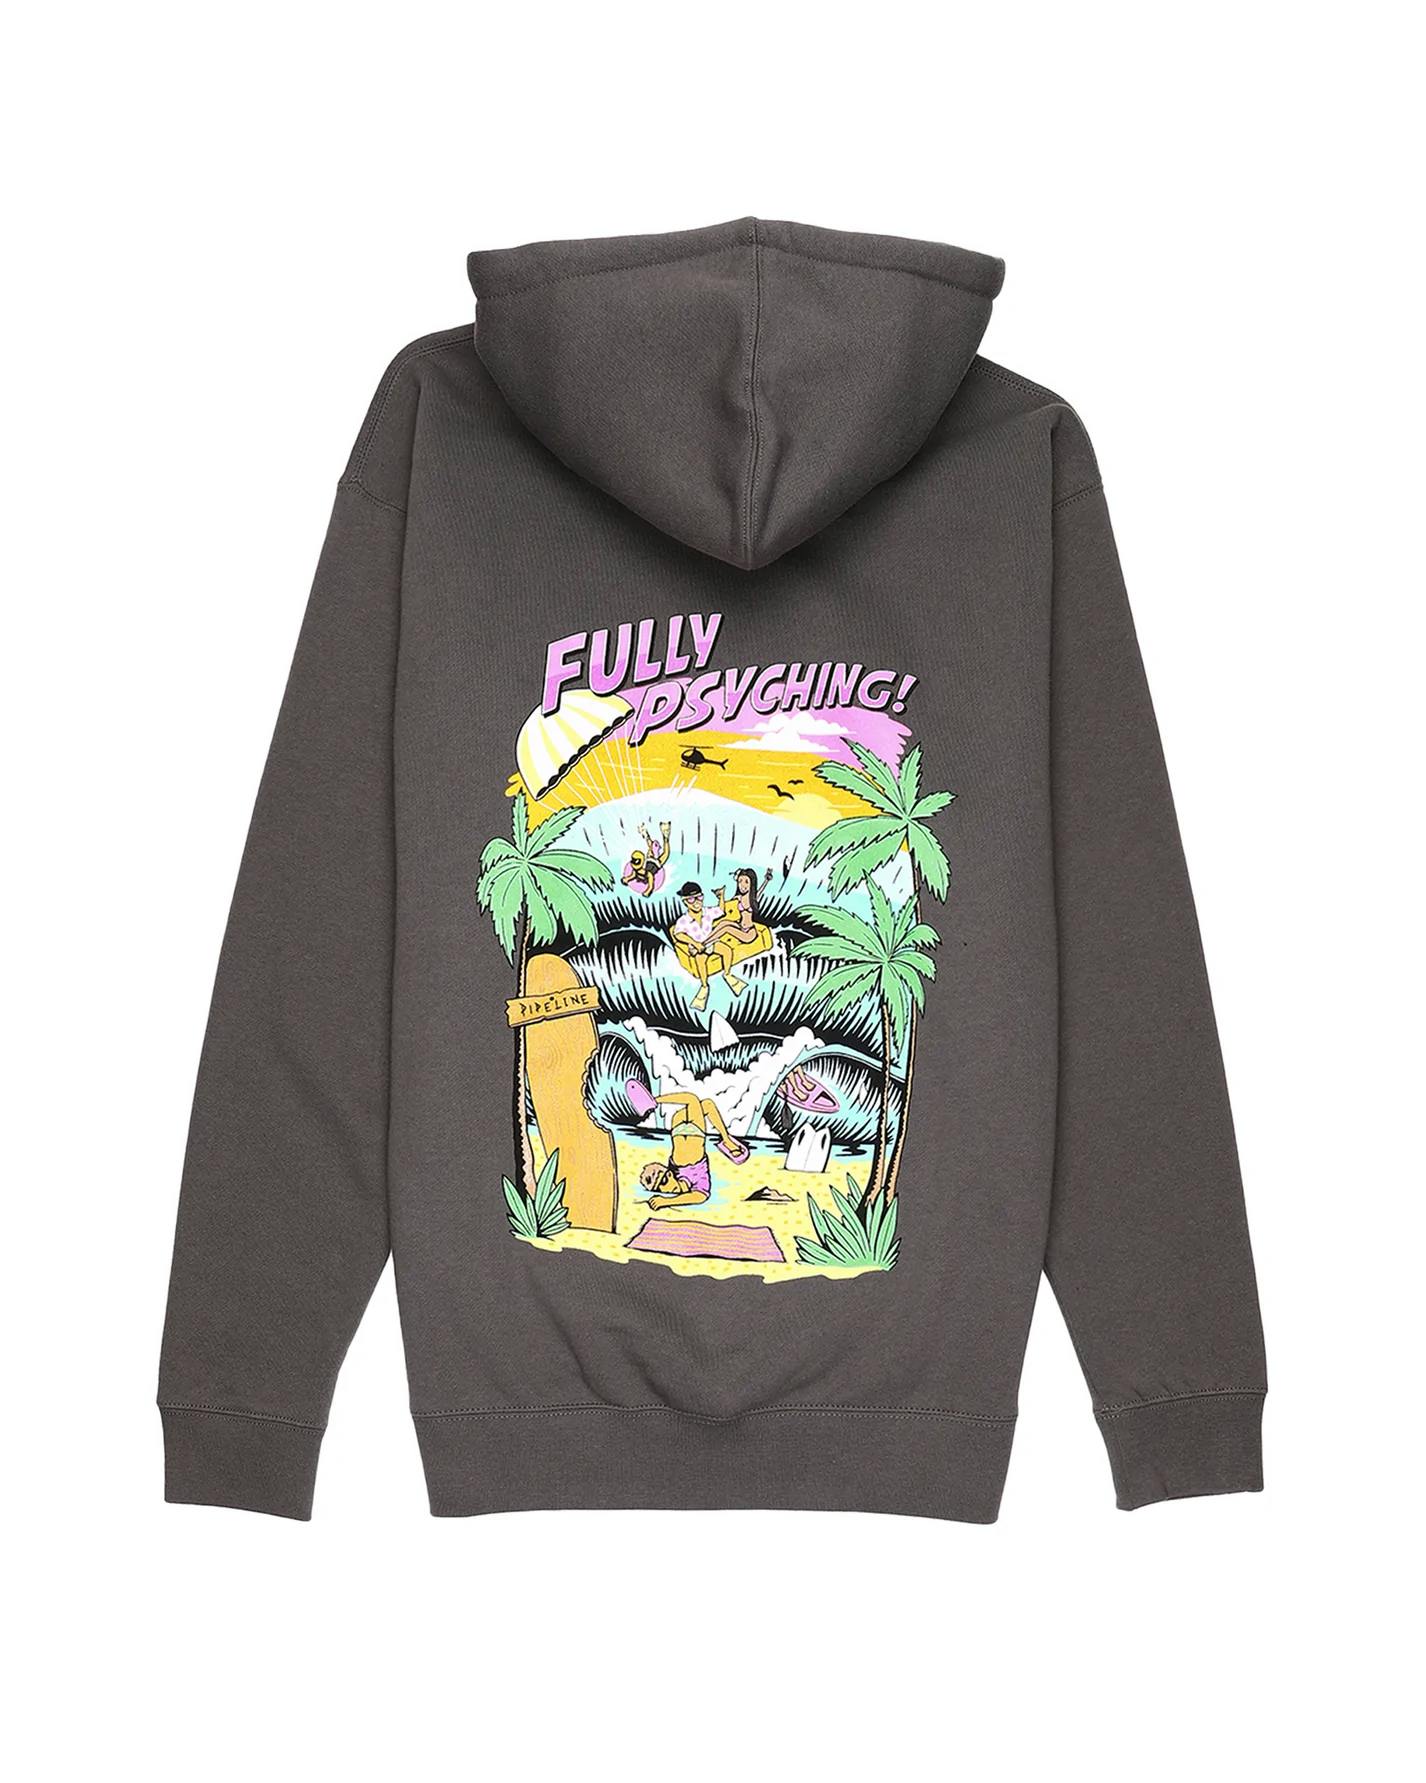 Fully Psyching | Charcoal Hoodie